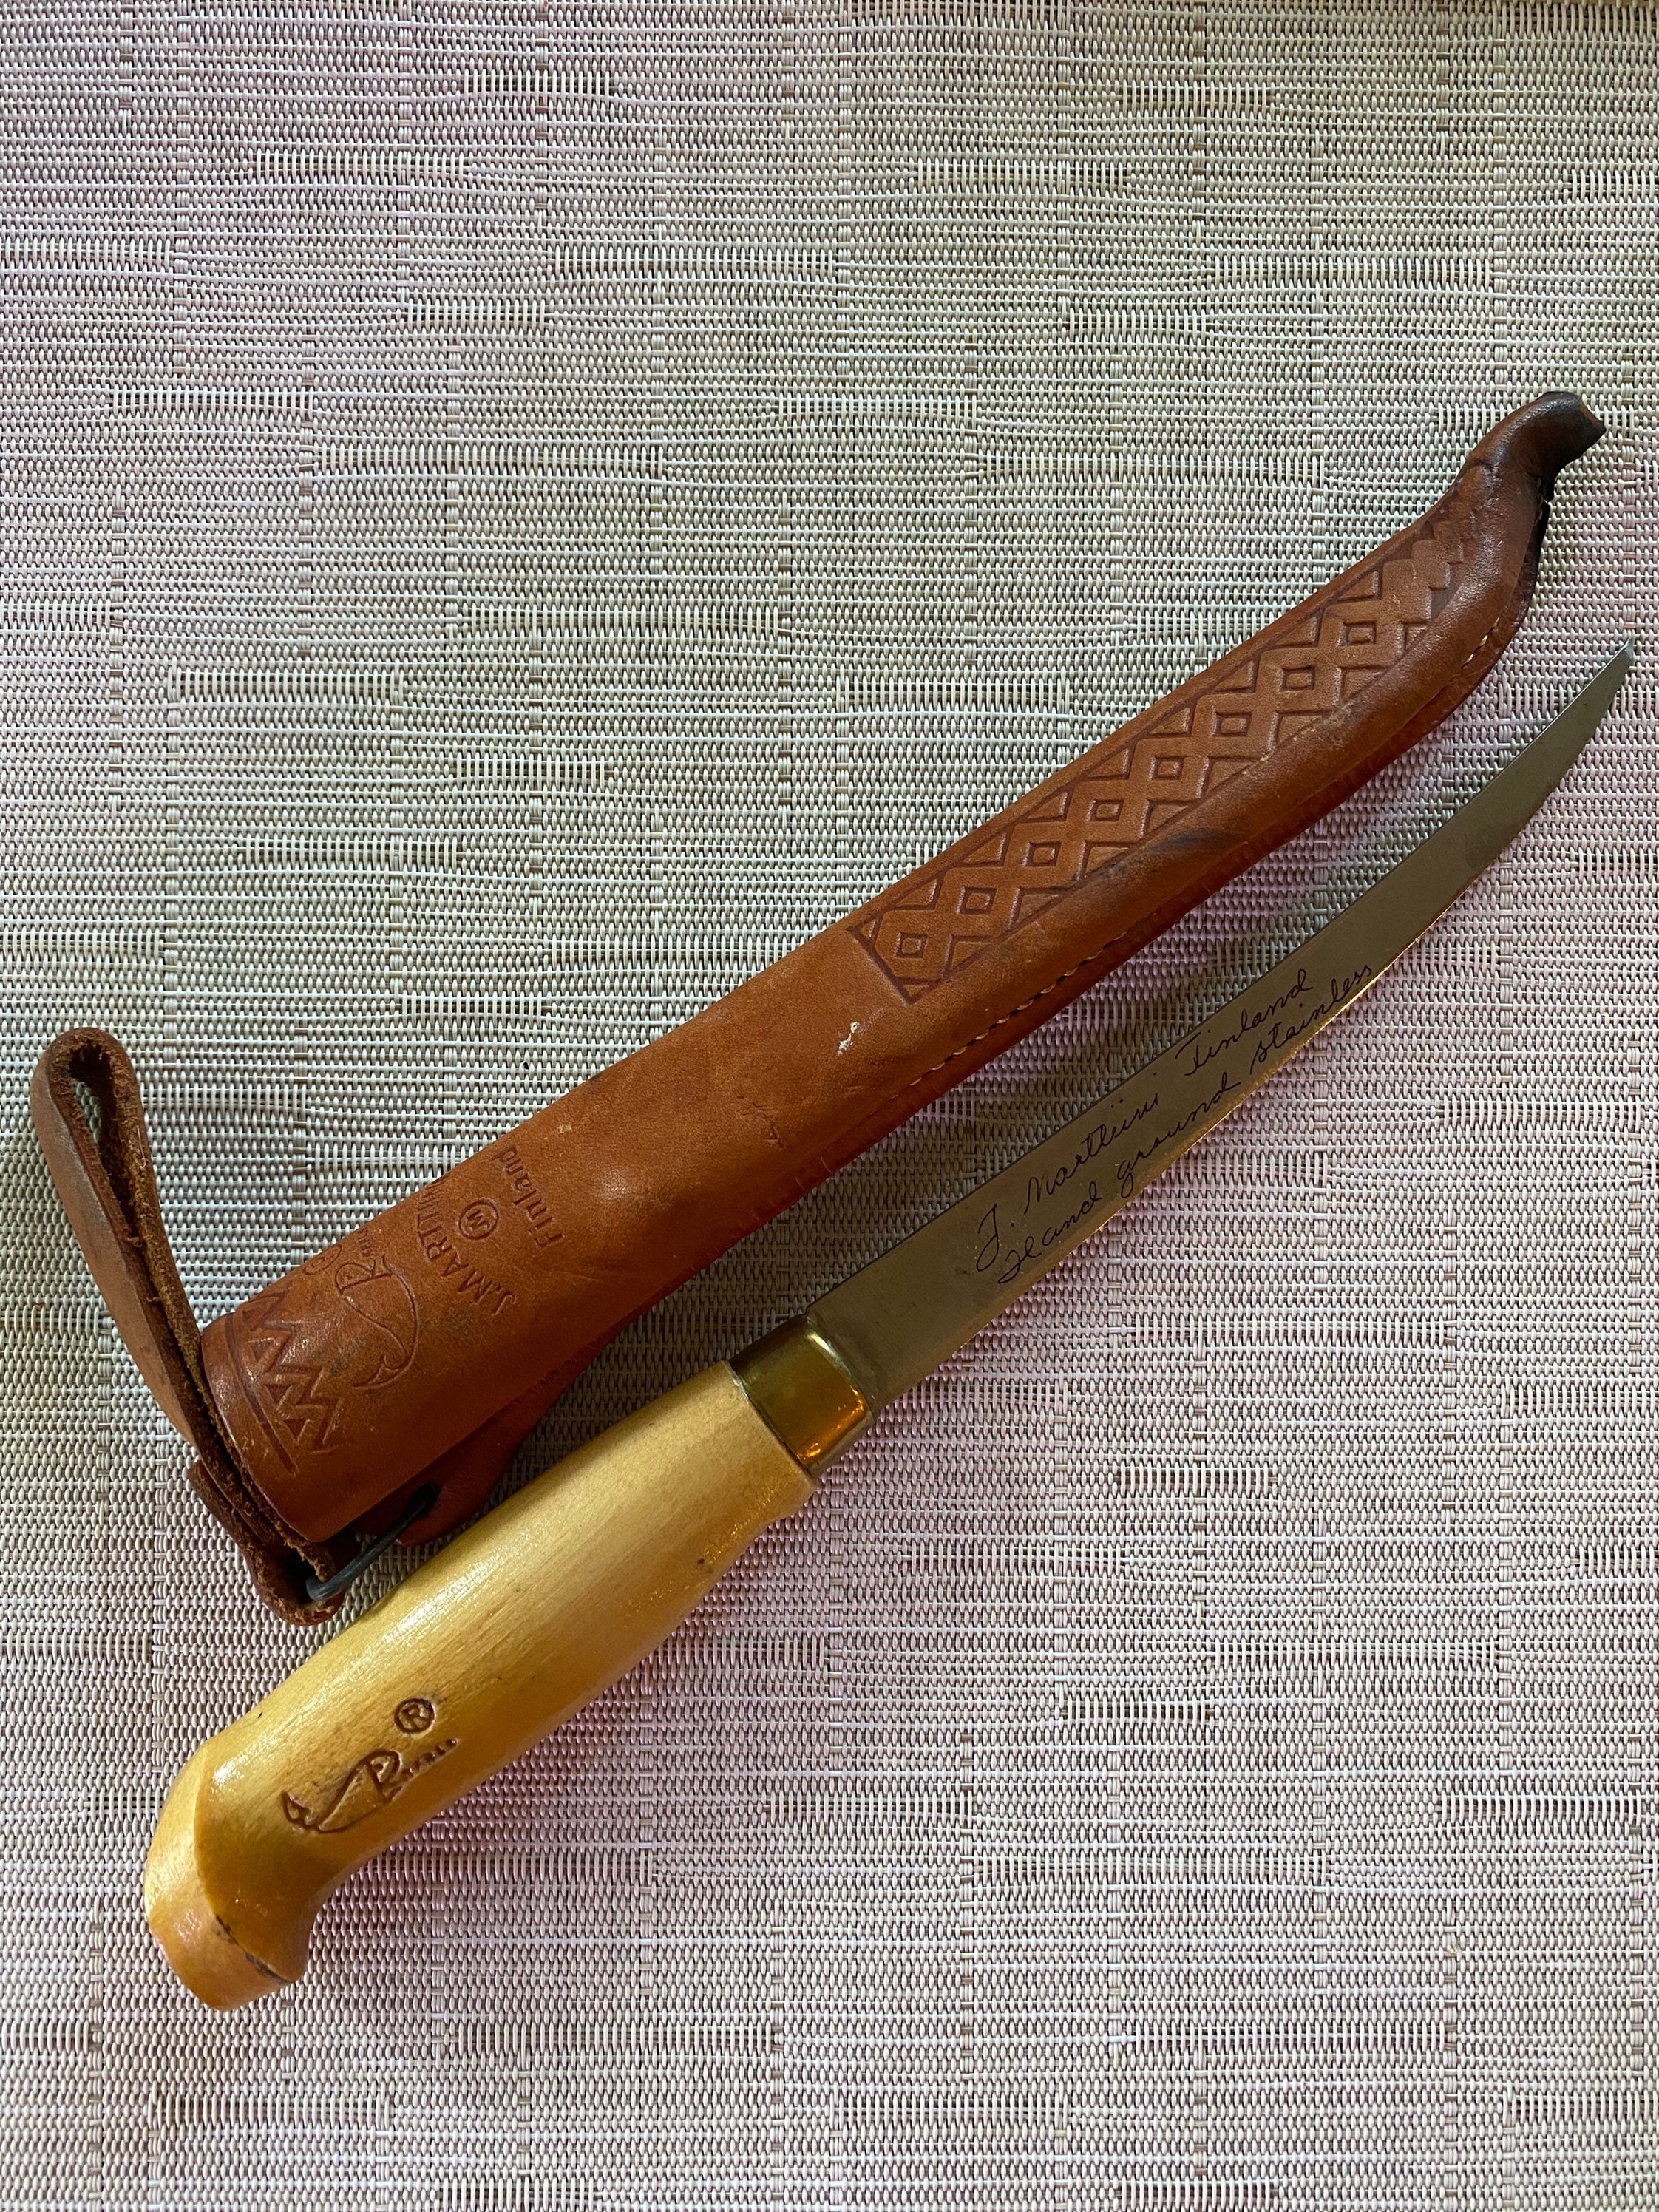 Vintage Rapala Fish and Fillet Boning Hunting Knife With Tooled Leather  Sheath Antique Swedish Steel Blade Handmade in Finland by J.marttini 